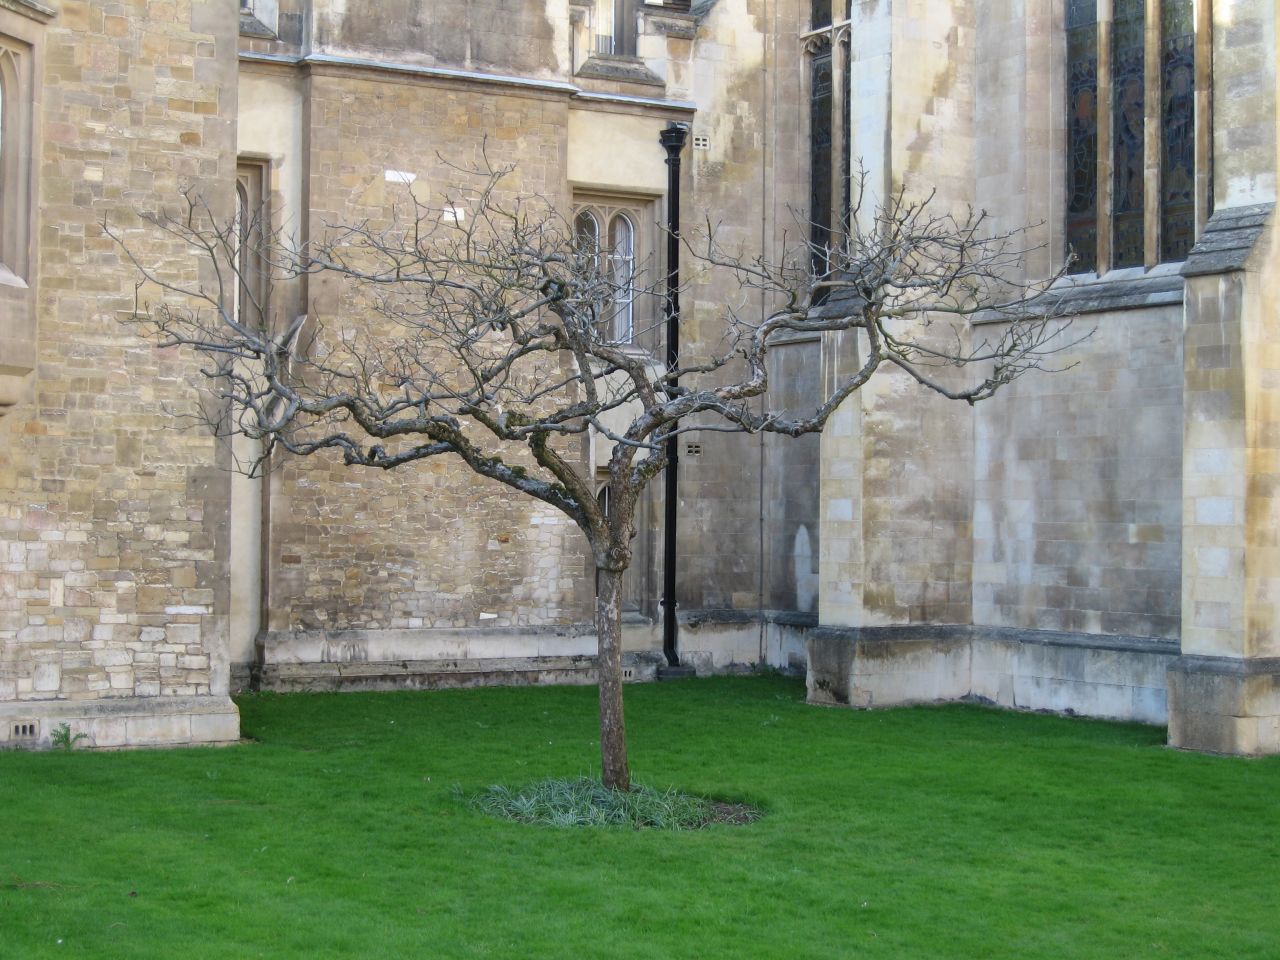 Could this really be the tree under which Sir Isaac Newton sat and conceived the universal theory of gravity as an apple conked him on the head? Well, we're pretty sure it isn't, considering the story itself is widely considered to be apocryphal. But, according to the Isaac Newton Institute for Mathematical Sciences at the University of Cambridge, where Newton was a fellow, <a href="http://www.newton.ac.uk/art/tree.html" target="_blank" target="_blank">it was taken as a cutting from the alleged tree</a> at Newton's birthplace in Woolsthorpe Manor, UK. Other alleged cuttings have been replanted as far as Nebraska, Vancouver, and Tokyo.